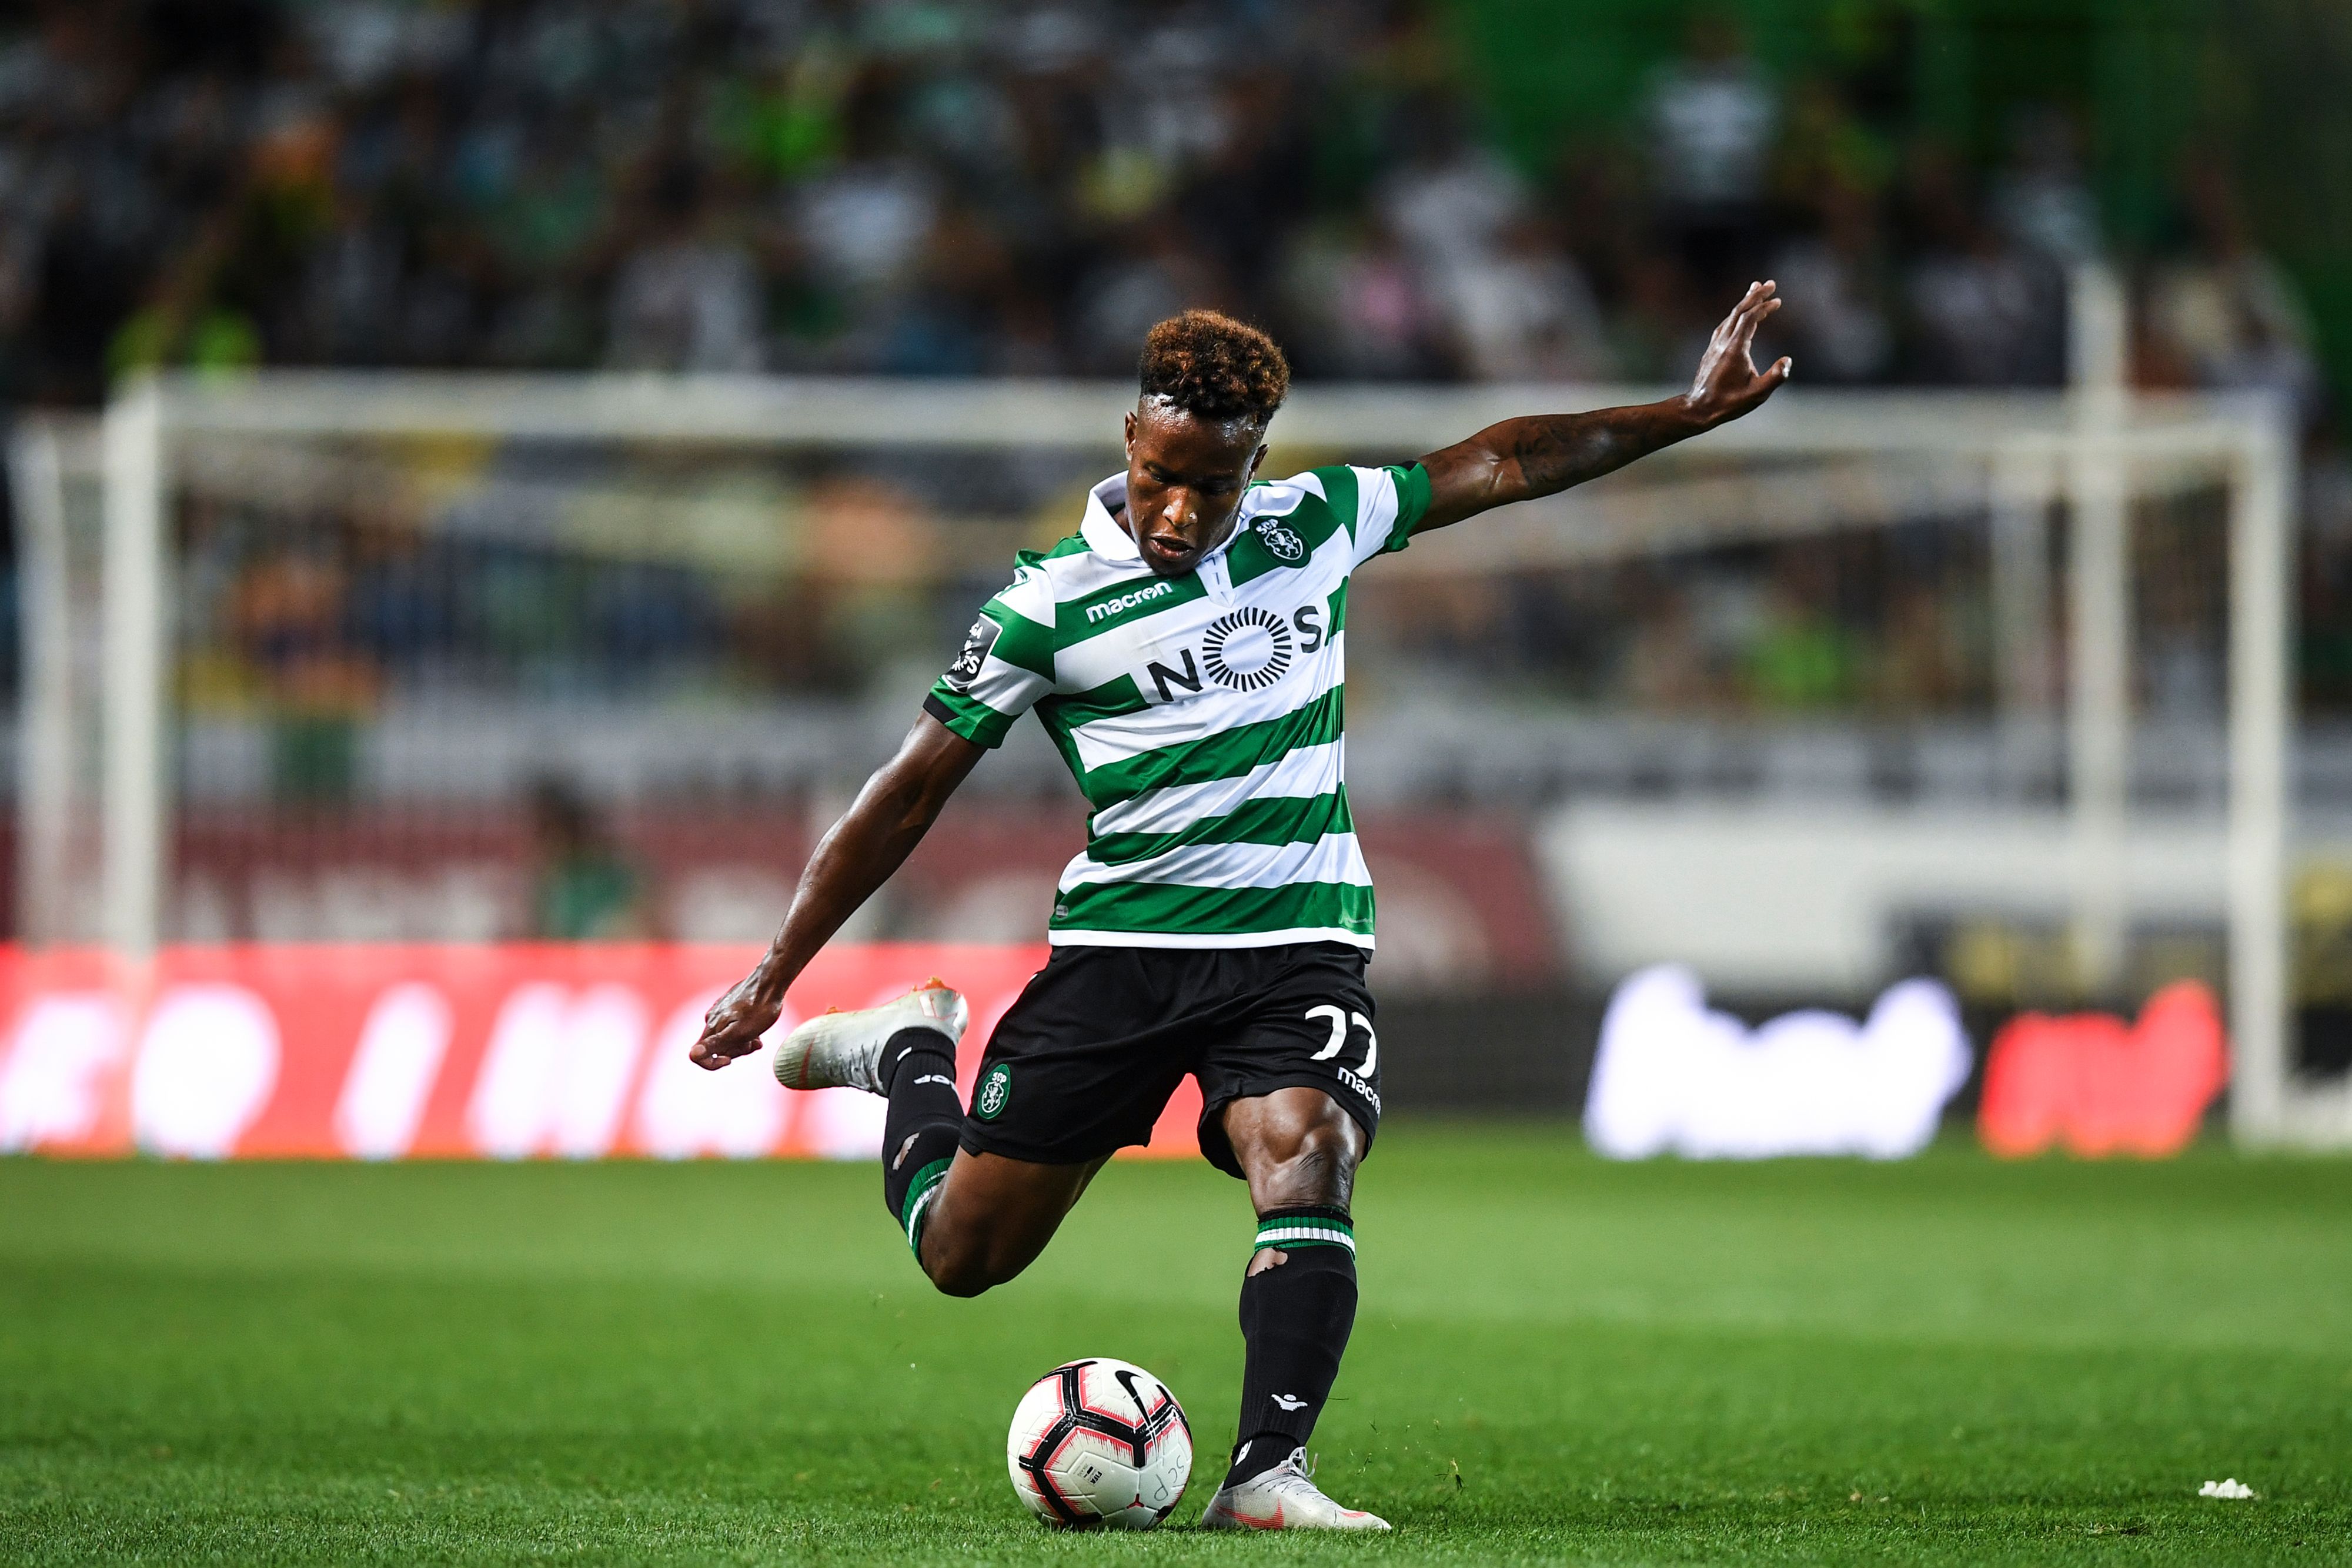 Sporting's Cape Verdean Jovane Cabral kicks the ball during the Portuguese league football match Sporting CP vs Feirense at the Alvalade stadium in Lisbon on September 1, 2018. (Photo by PATRICIA DE MELO MOREIRA / AFP)        (Photo credit should read PATRICIA DE MELO MOREIRA/AFP/Getty Images)